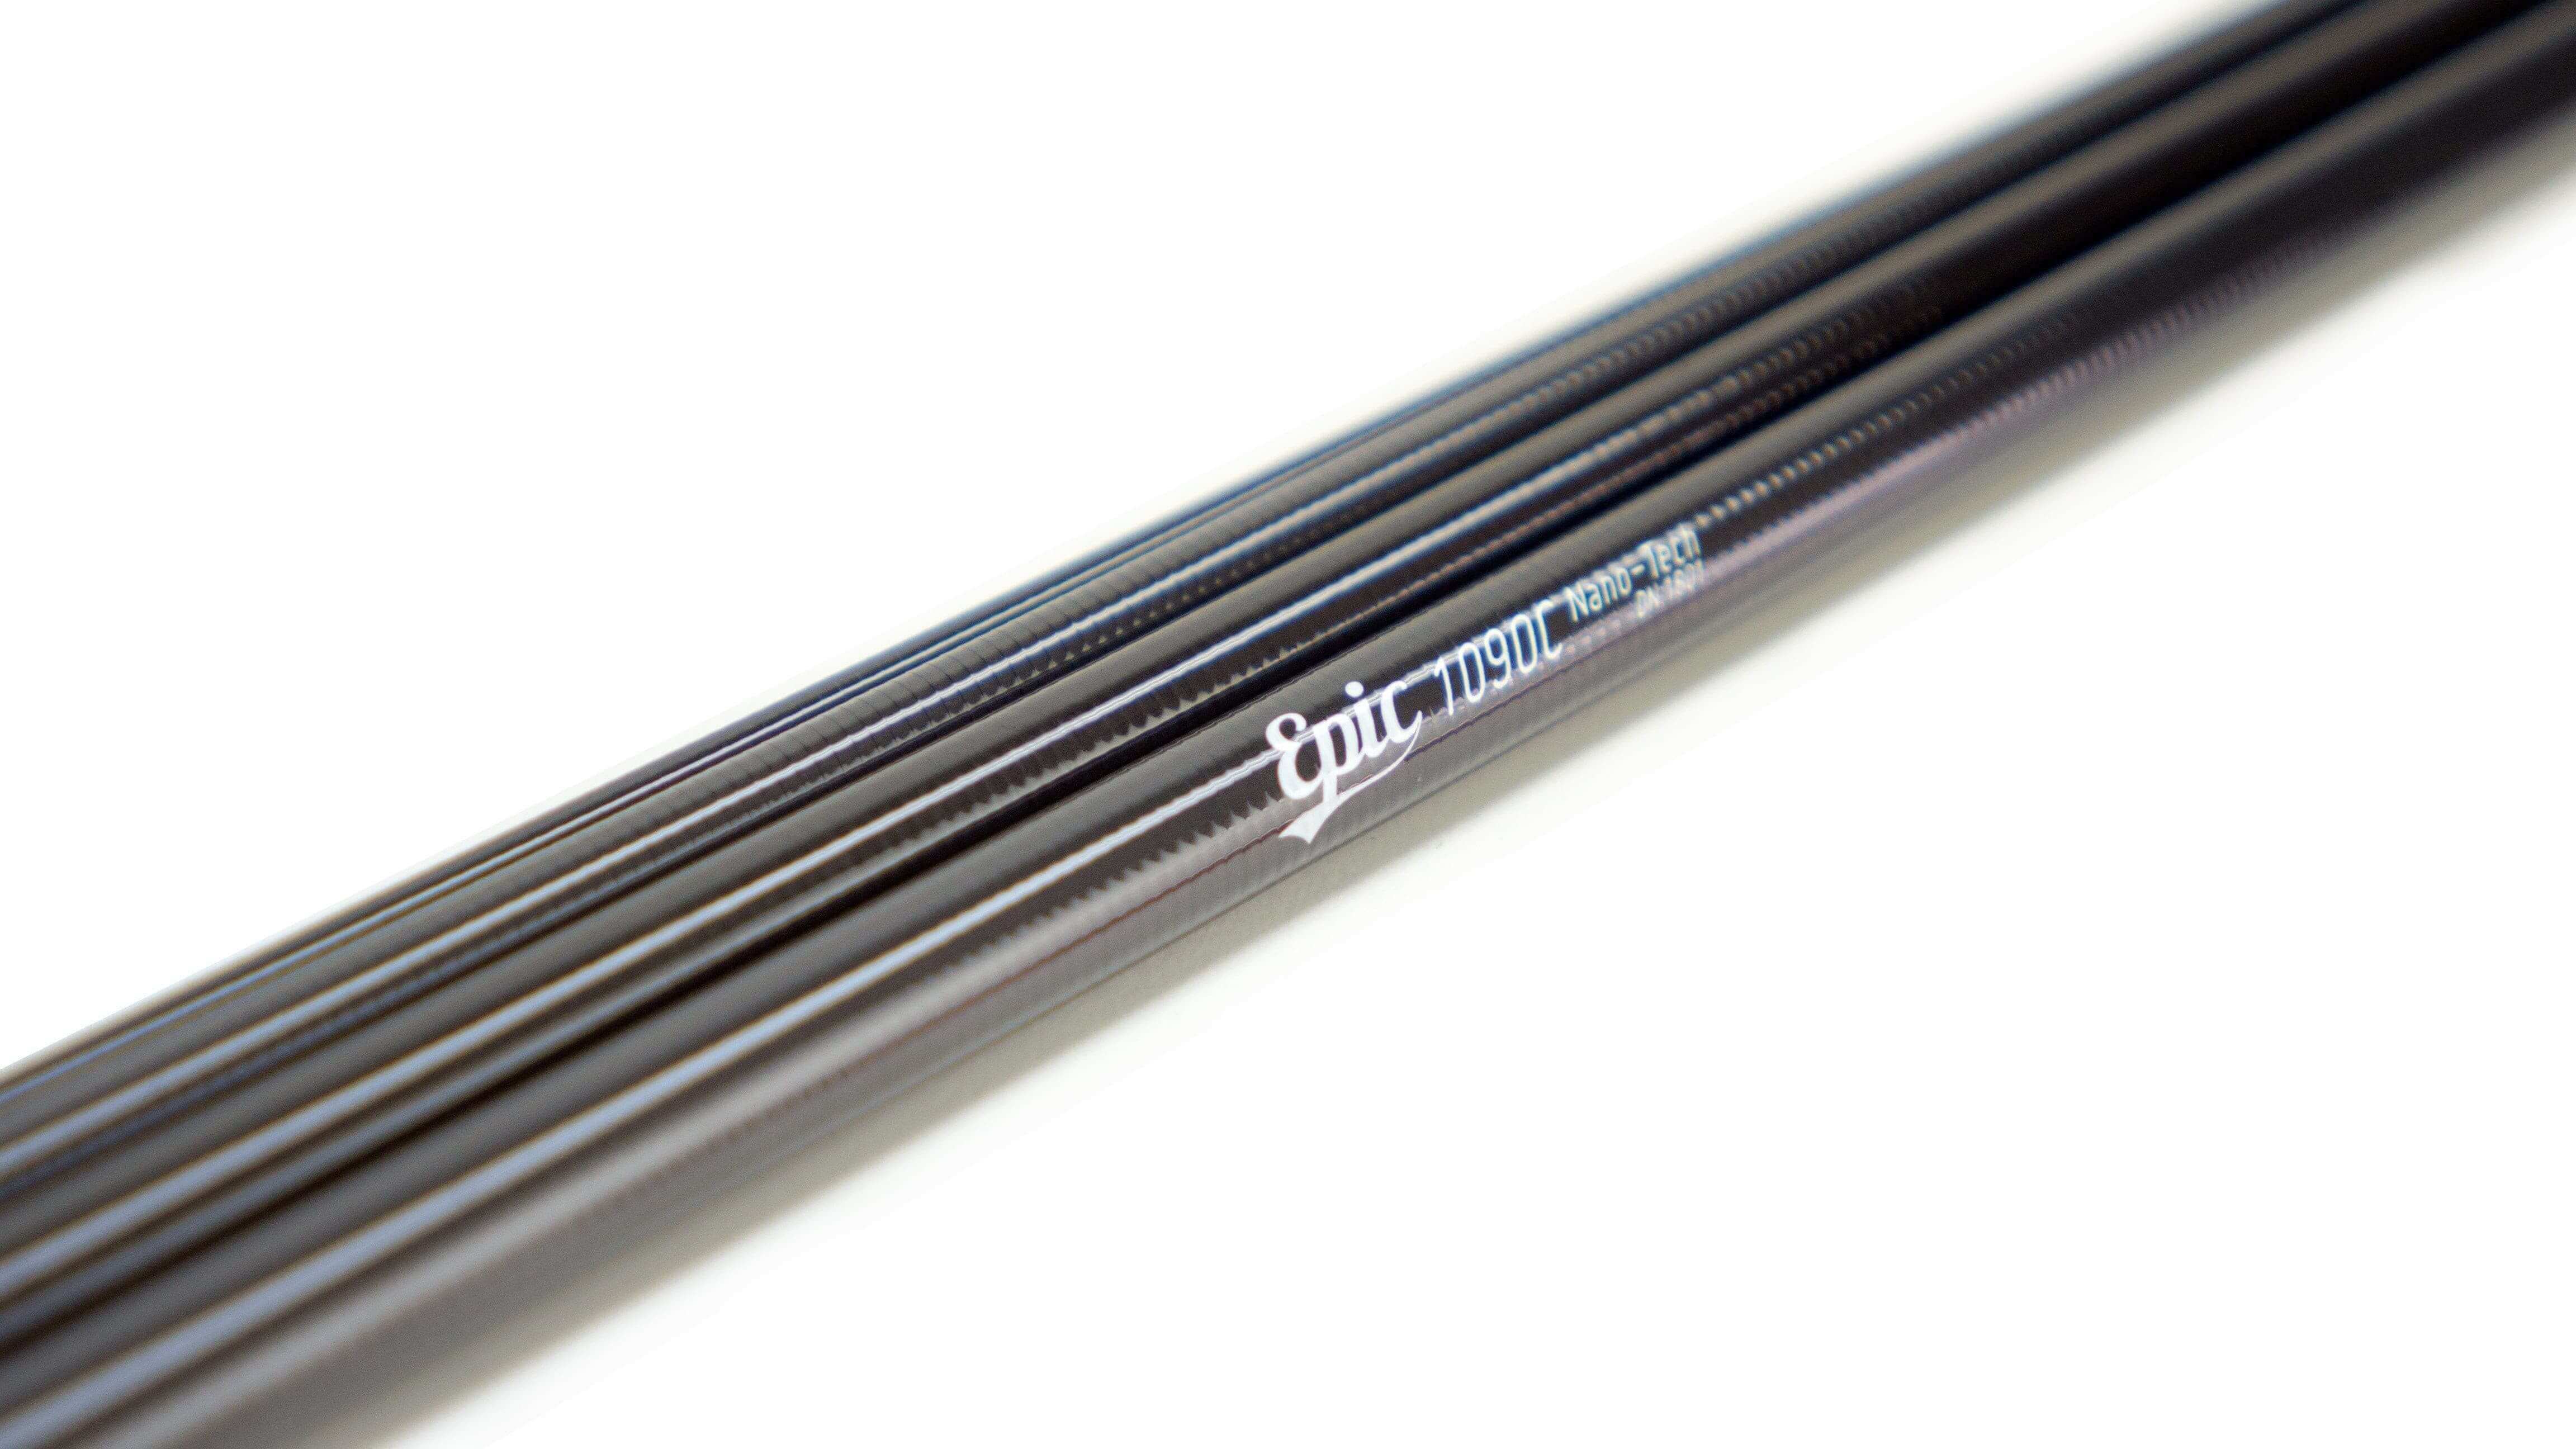 6'6 2wt. (four piece) carbon fiber fly rod blank (NOW IN A GLOSSY DARK  GREEN)